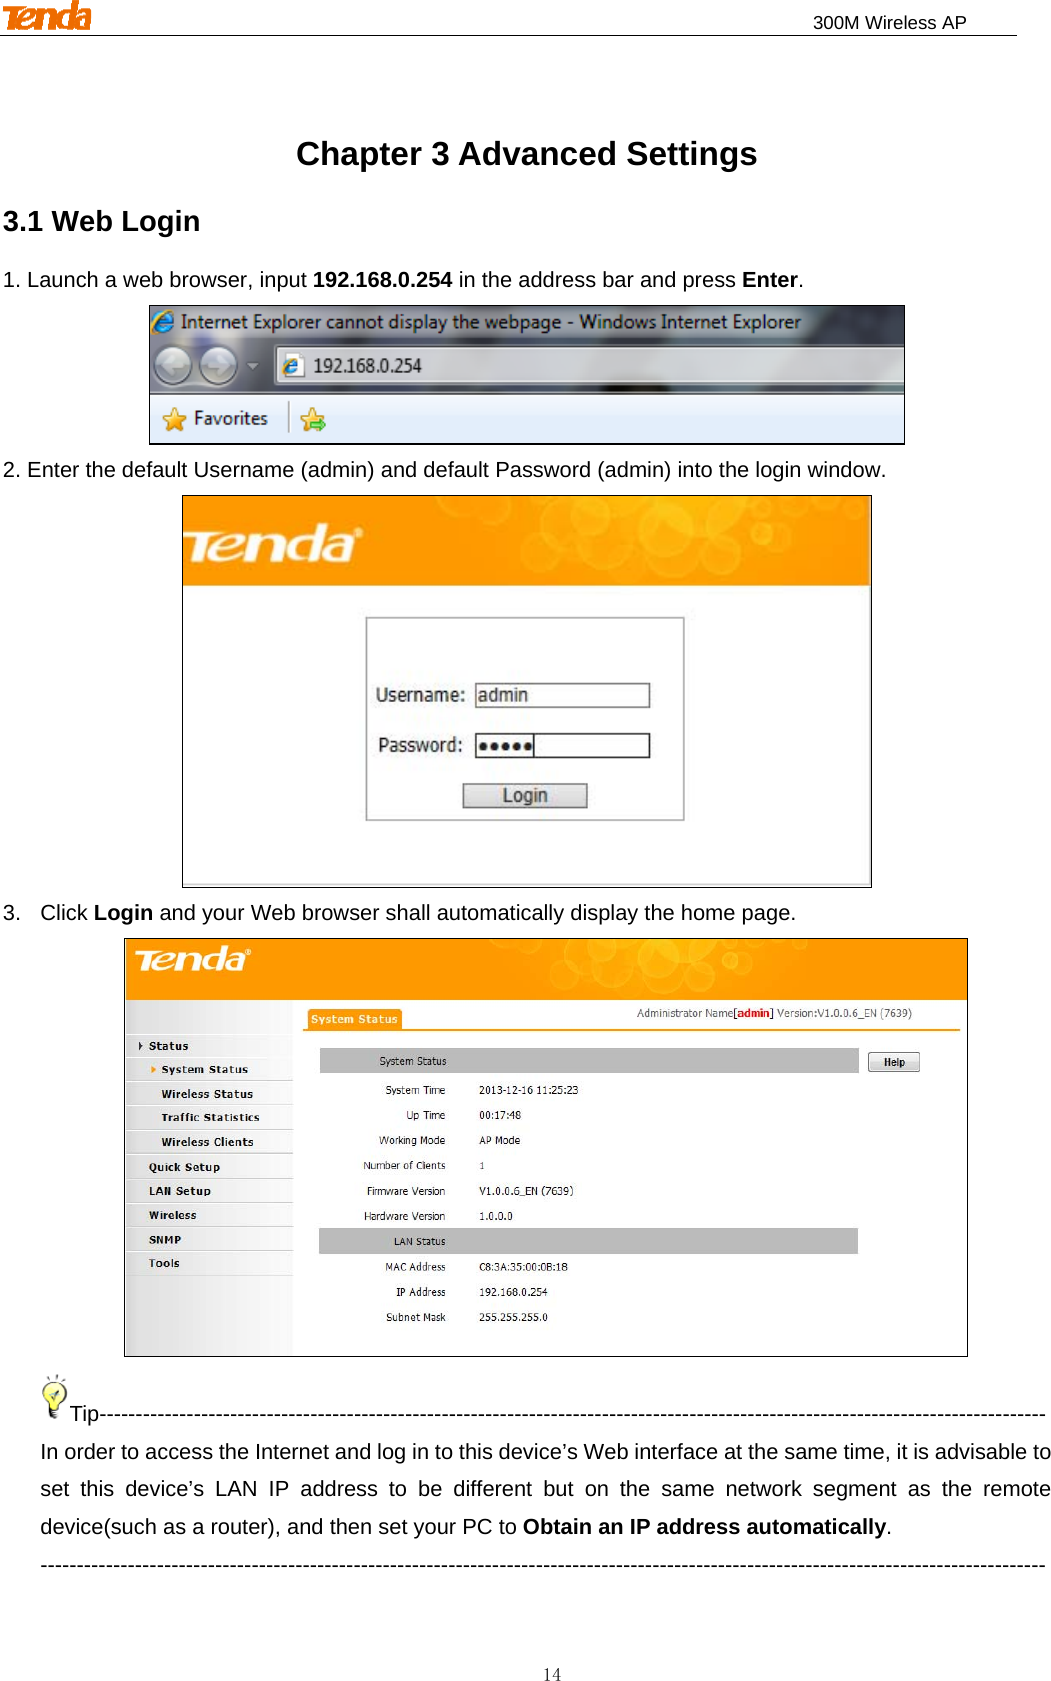                                                                              300M Wireless AP 14 Chapter 3 Advanced Settings 3.1 Web Login 1. Launch a web browser, input 192.168.0.254 in the address bar and press Enter.  2. Enter the default Username (admin) and default Password (admin) into the login window.  3. Click Login and your Web browser shall automatically display the home page.    Tip---------------------------------------------------------------------------------------------------------------------------------- In order to access the Internet and log in to this device’s Web interface at the same time, it is advisable to set this device’s LAN IP address to be different but on the same network segment as the remote device(such as a router), and then set your PC to Obtain an IP address automatically.   ------------------------------------------------------------------------------------------------------------------------------------------ 